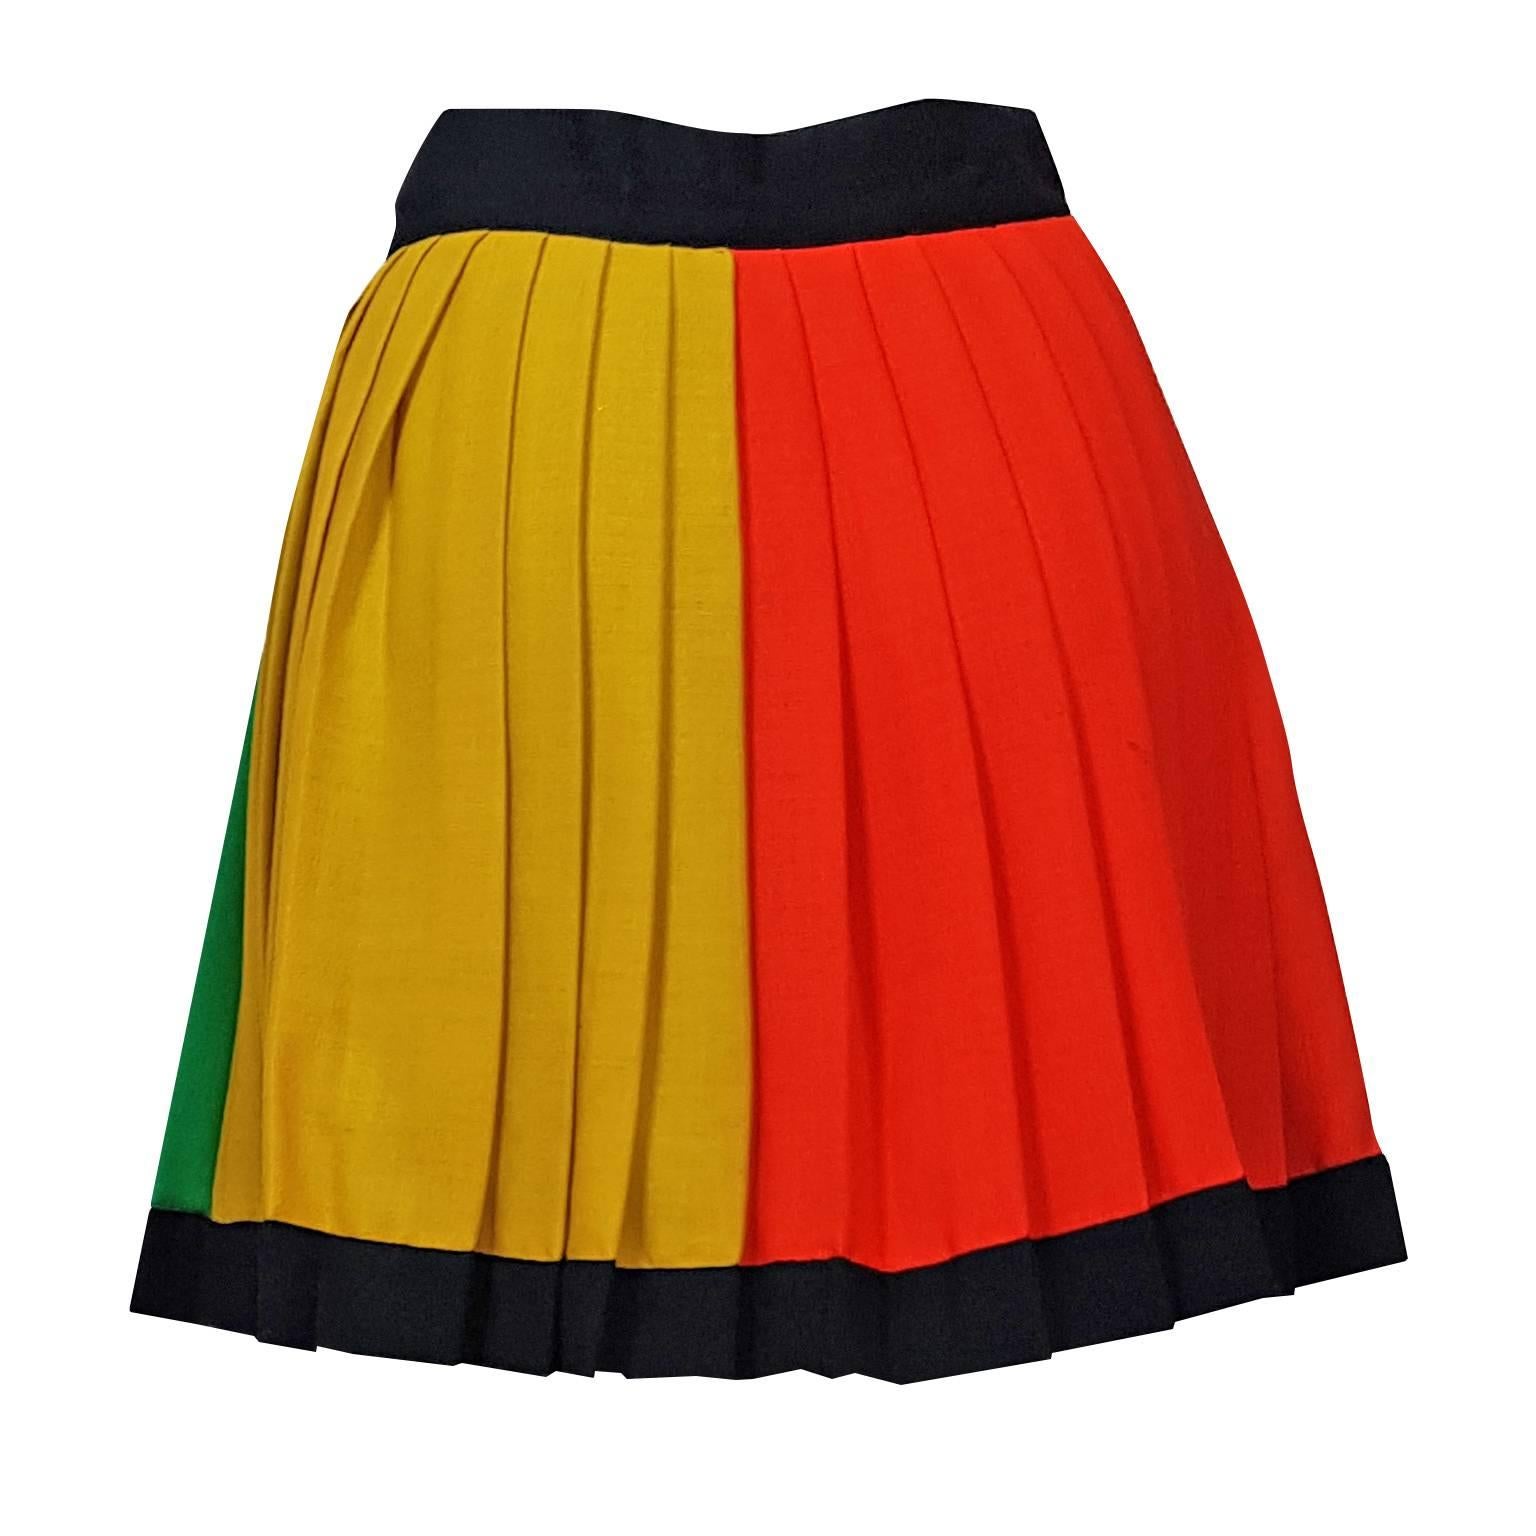 Gianni Versace couture colour block skirt in contrasting shades of red, green, blue, yellow and black, collection aw 1991.
Size : 42 (IT)
Measurements : 
Waist : 70 cm
Length 44 cm